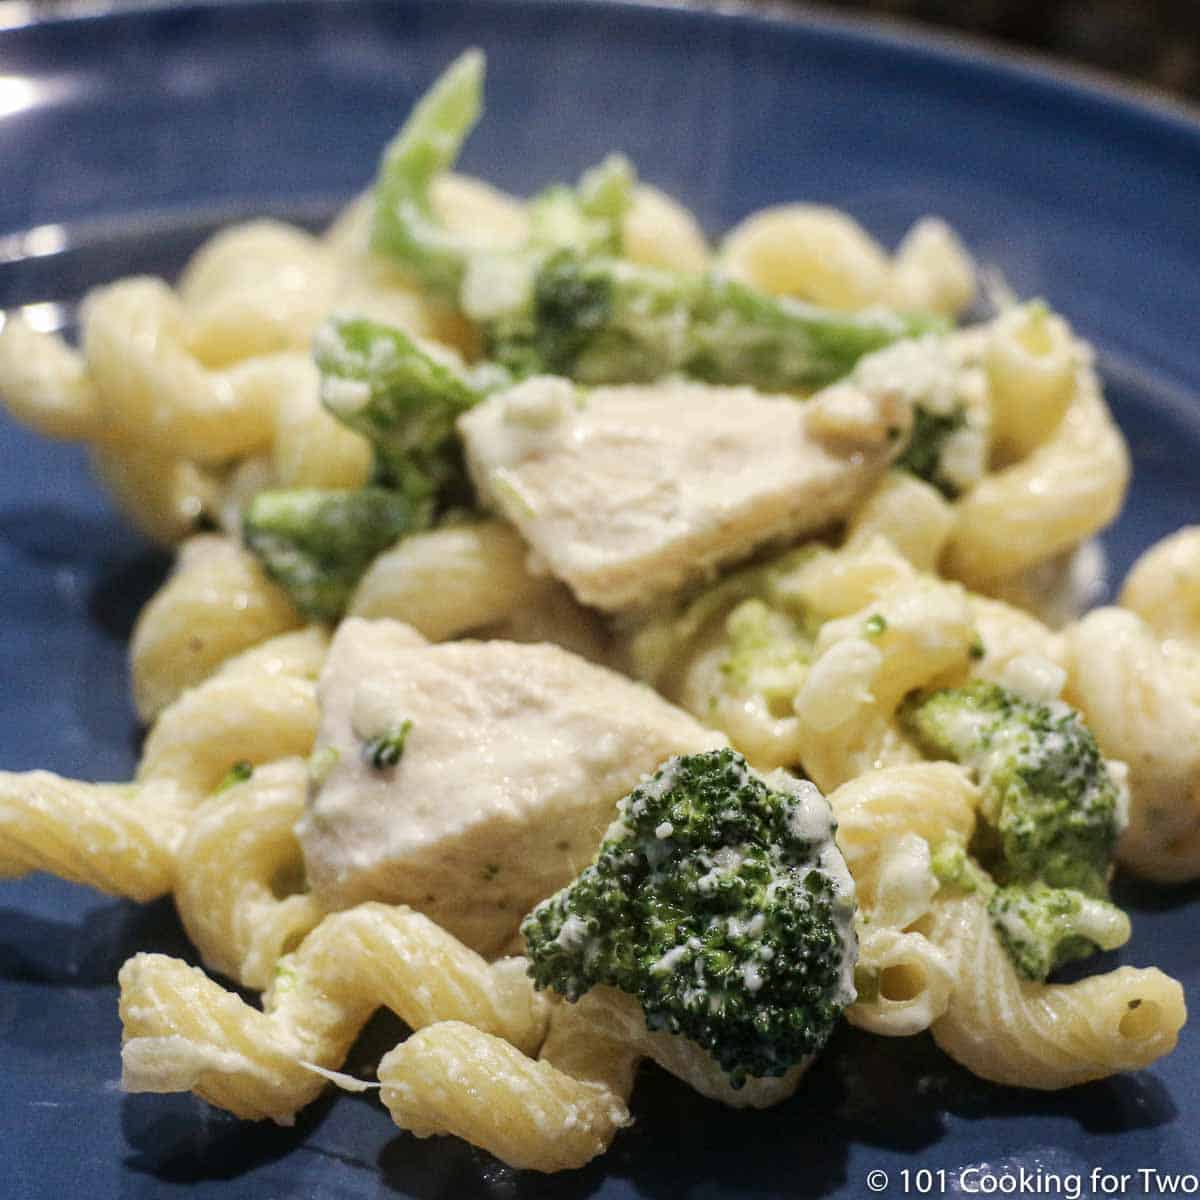 chicken and broccoli on pasta on blue plate